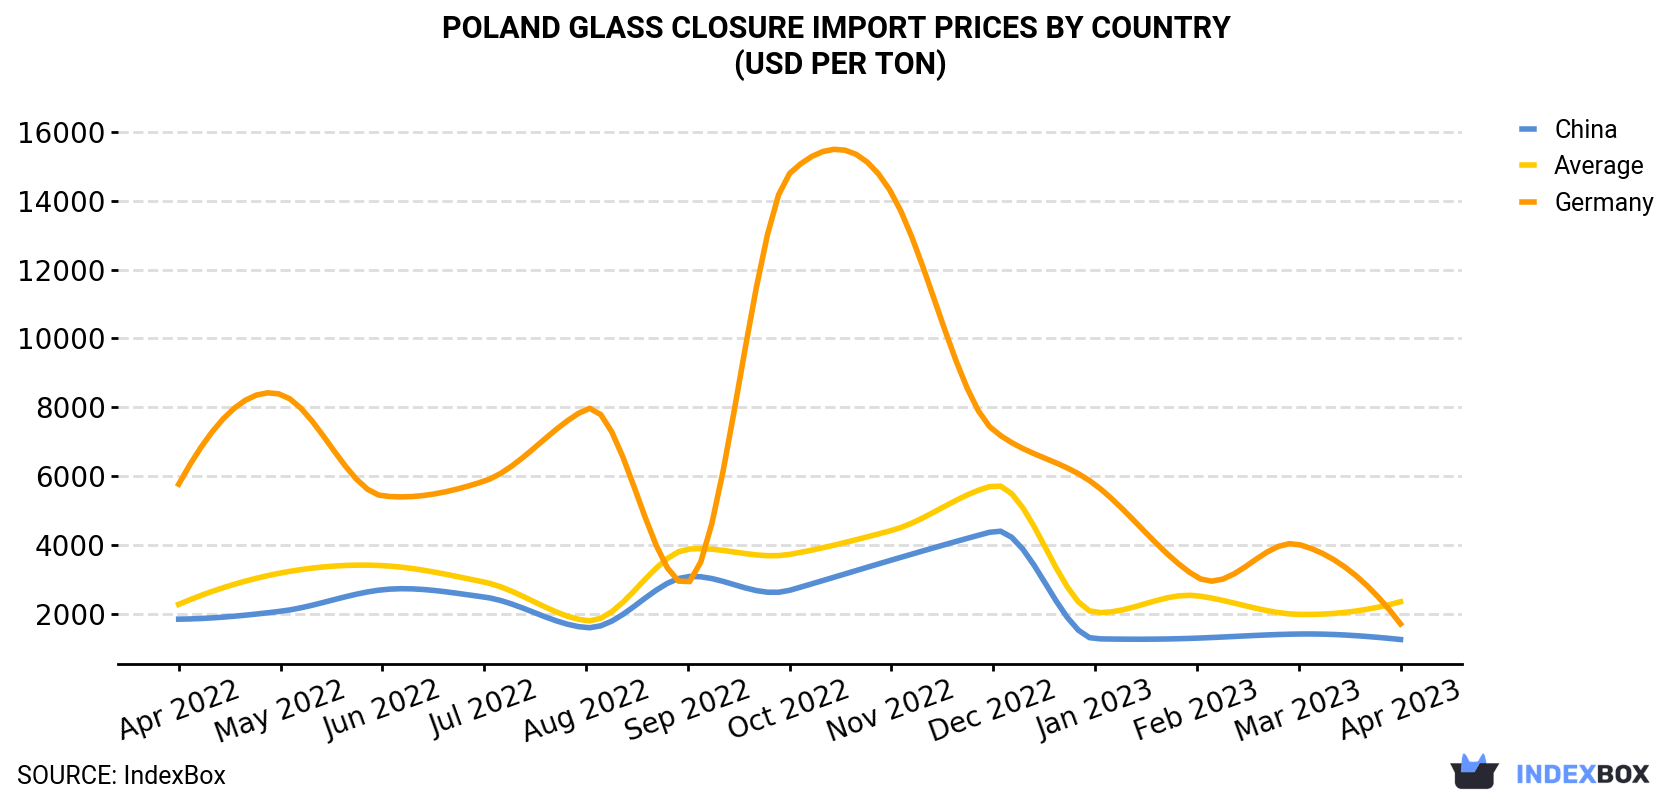 Poland Glass Closure Import Prices By Country (USD Per Ton)